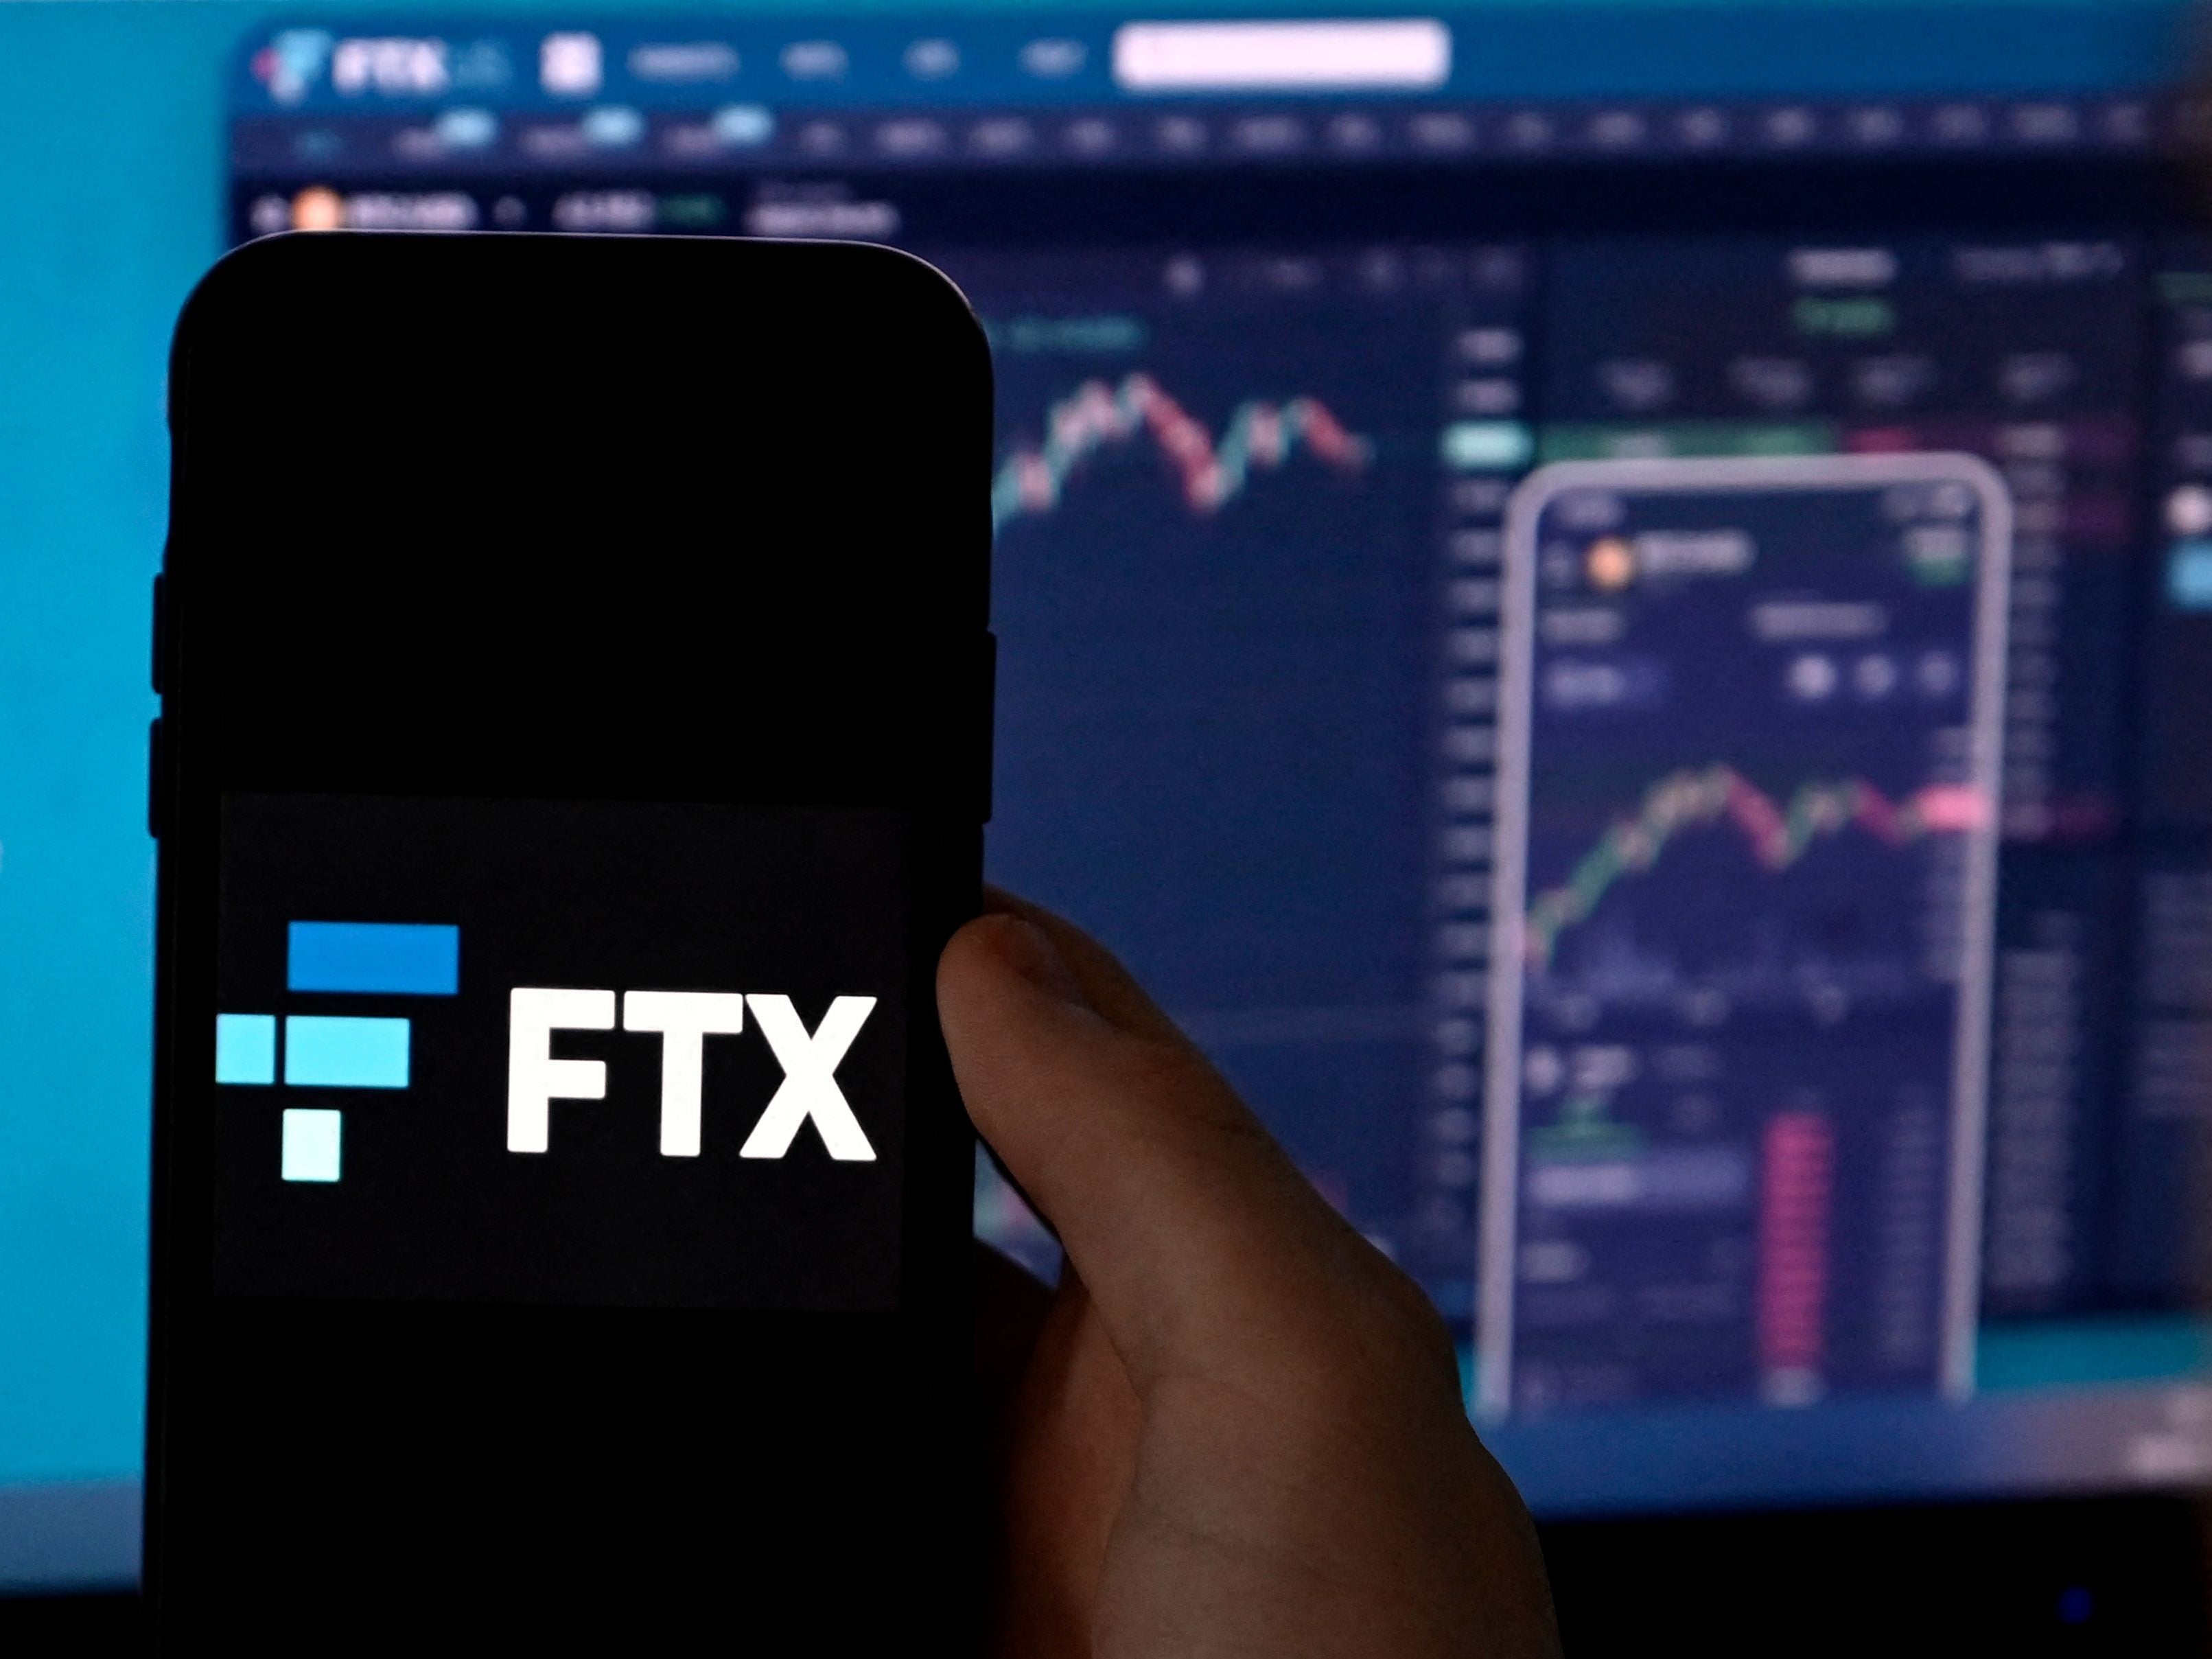 Leading crypto exchange Binance announced on 8 November that it intends to acquire rival FTX